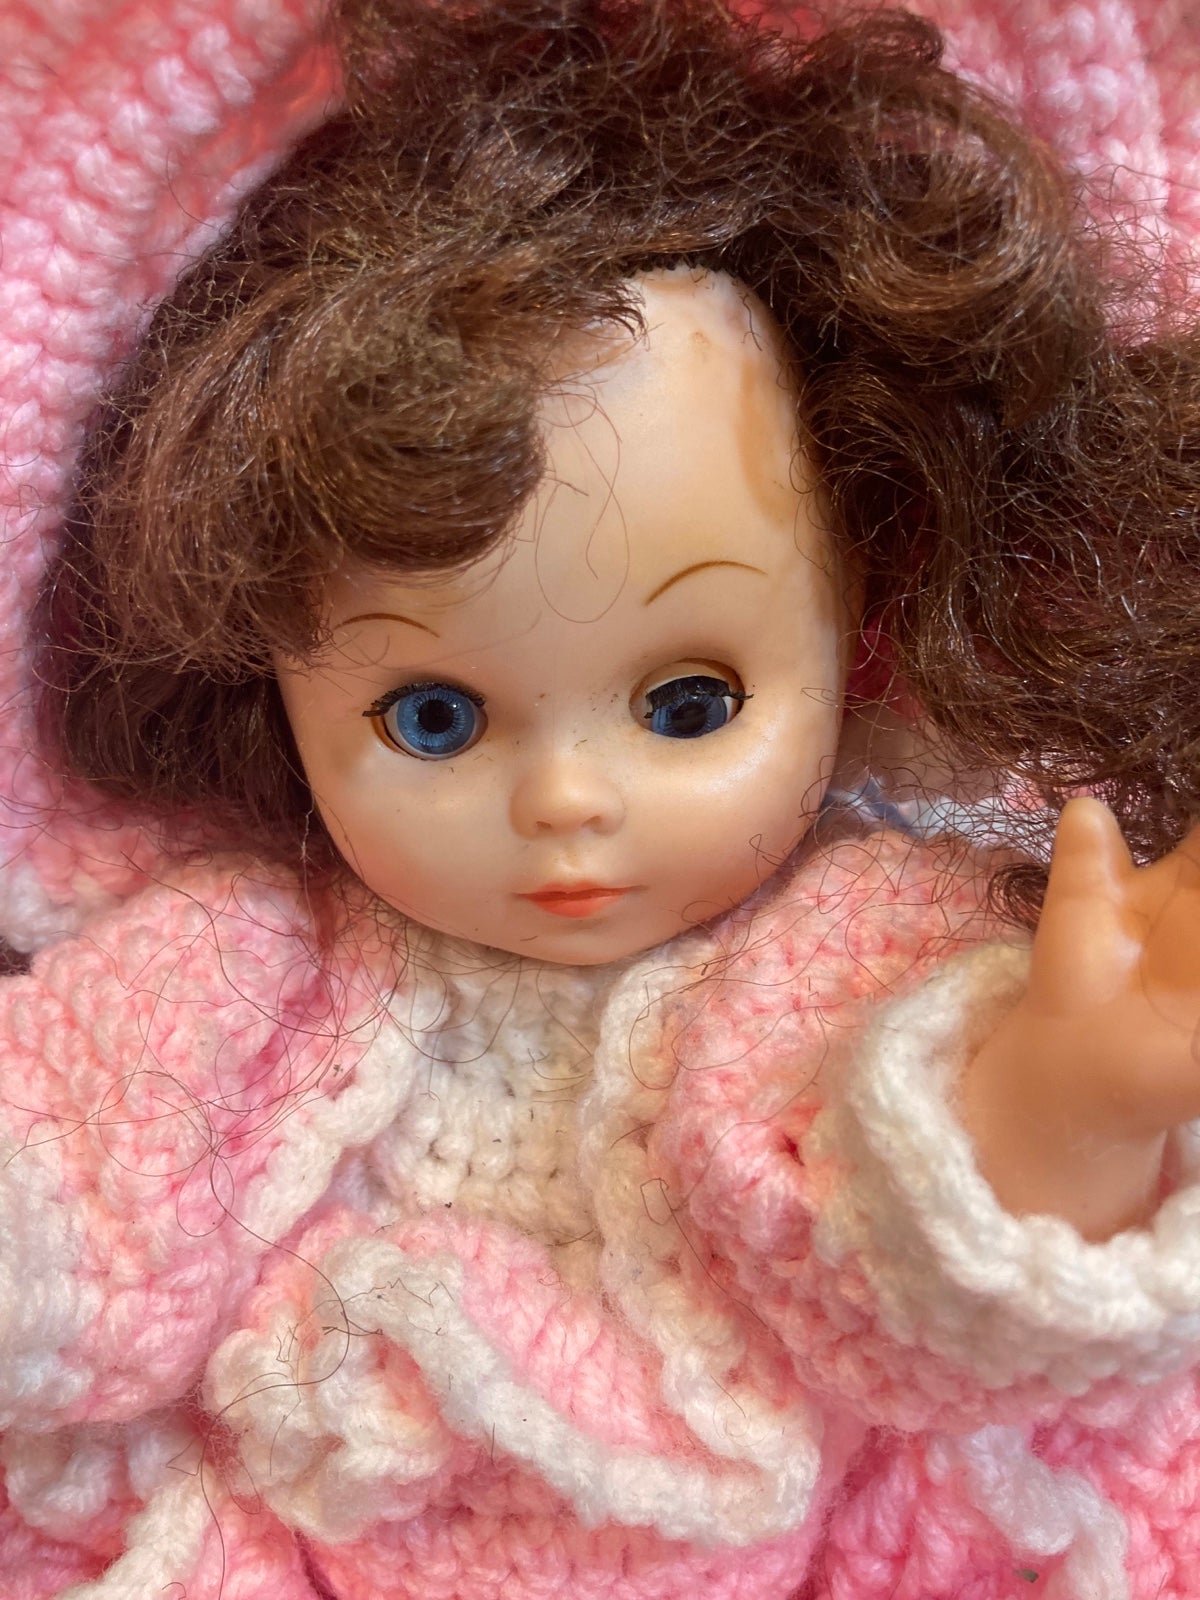 Vintage Hand Sewn Doll   It’s time for another girl to own this gDH8epqe8